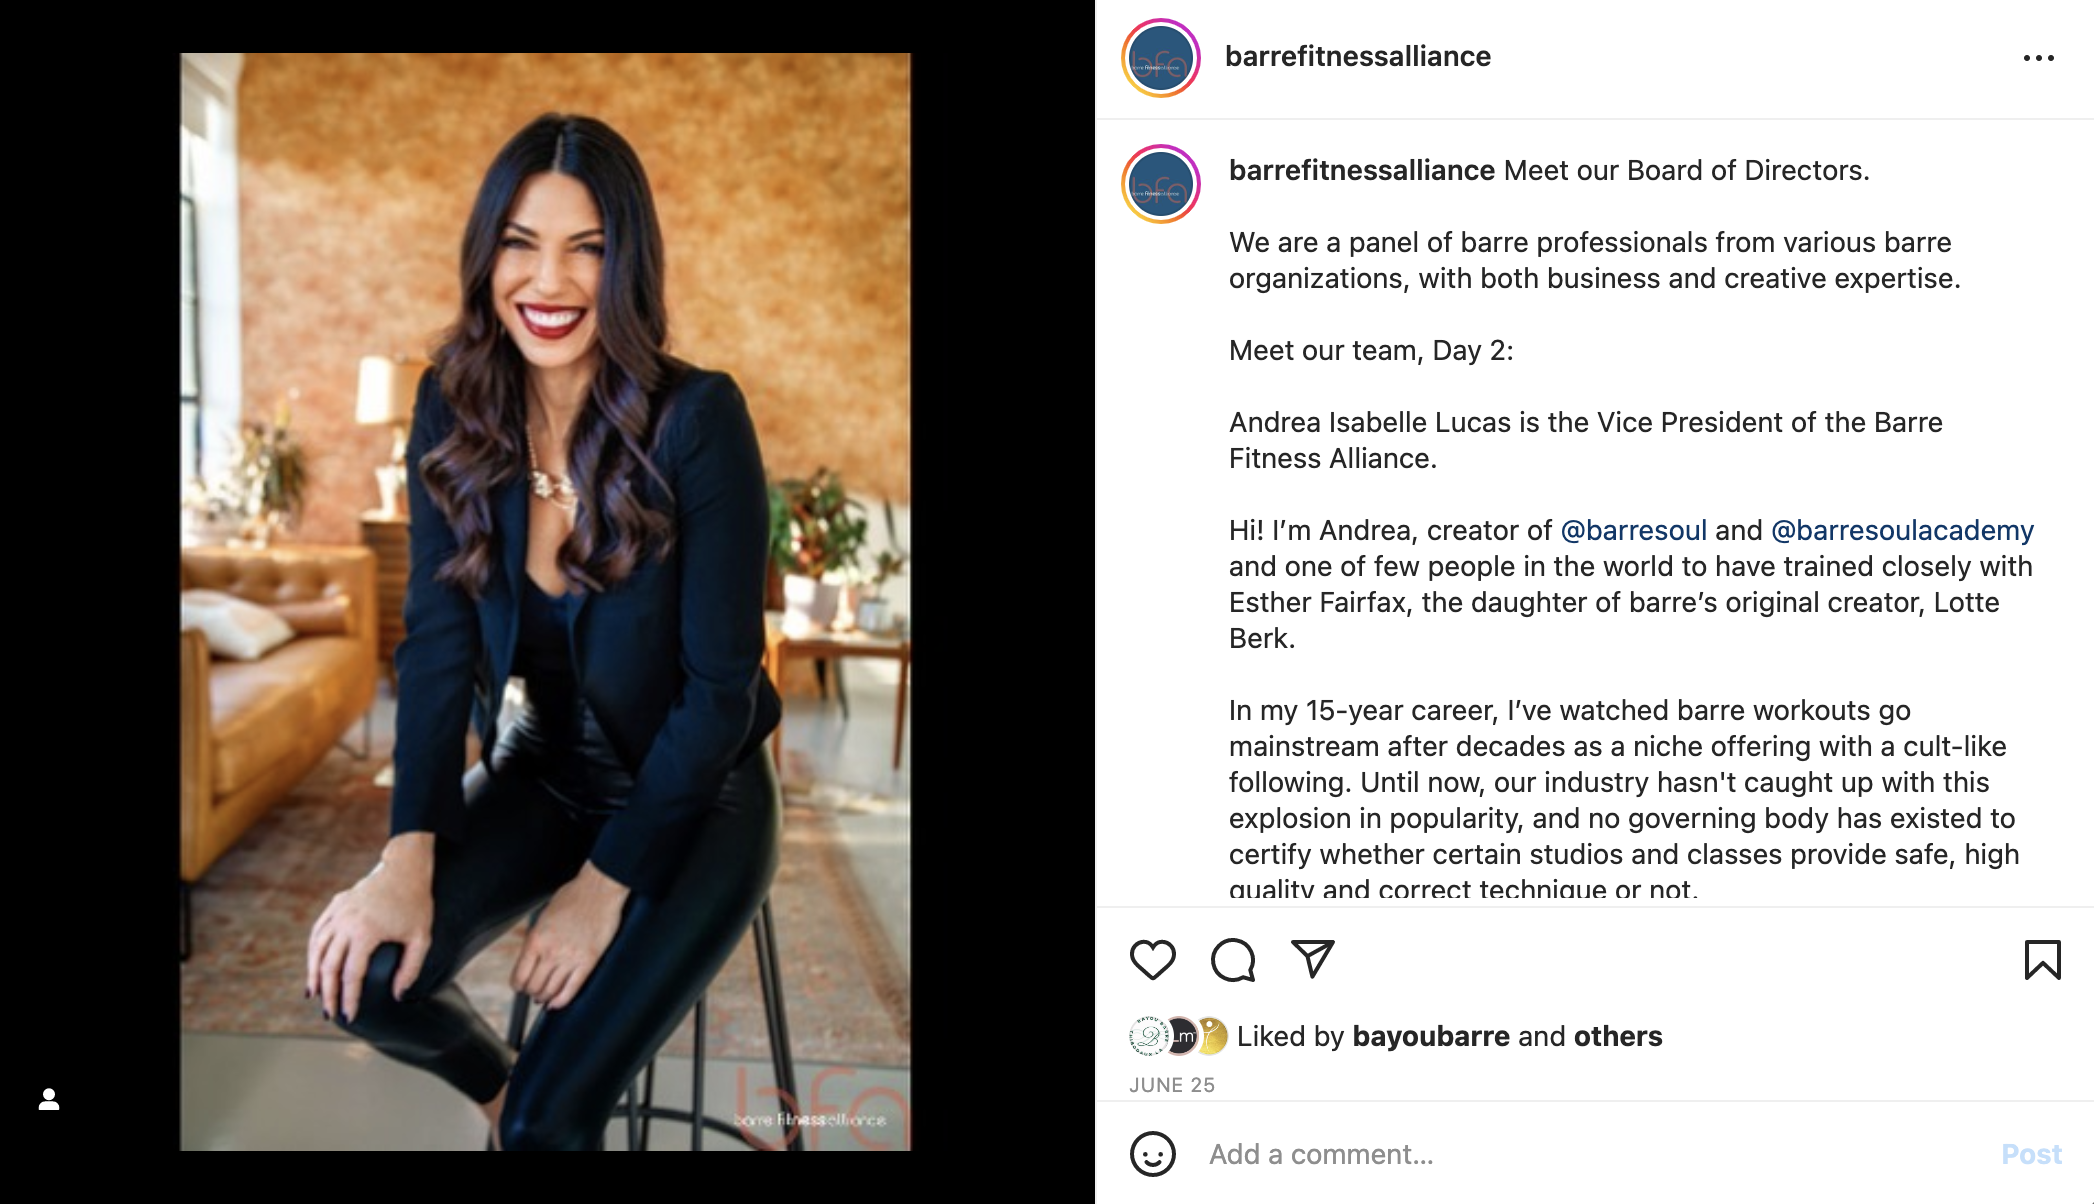 An Instagram post from the Barre Fitness Alliance introducing Andrea Isabelle Lucas, VP of the BFA